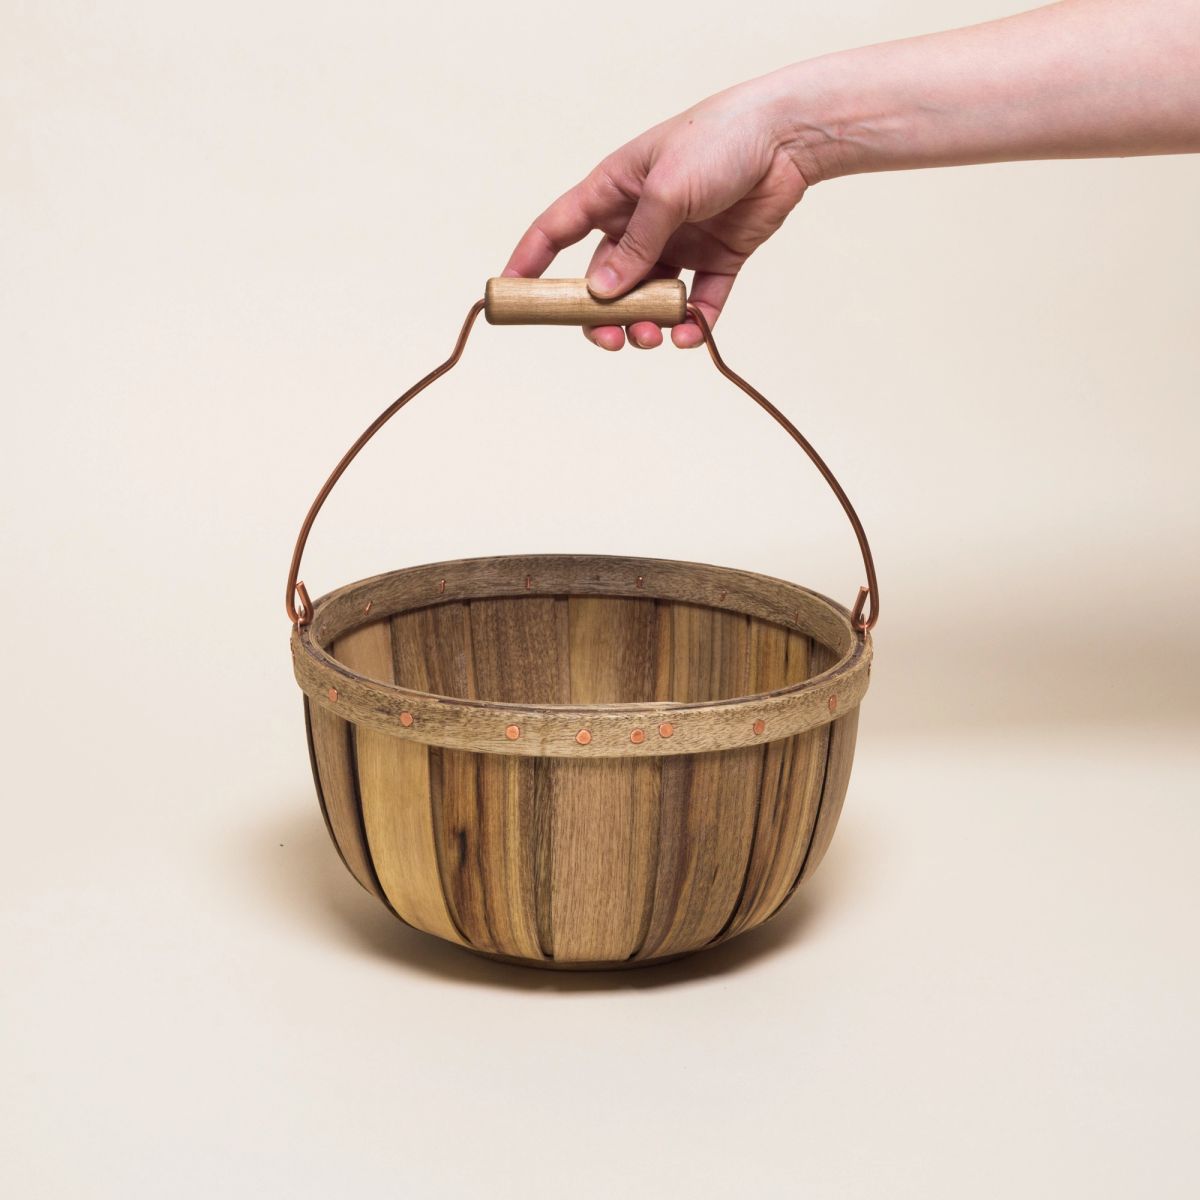 A hand holds the metal handle of a round wooden basket